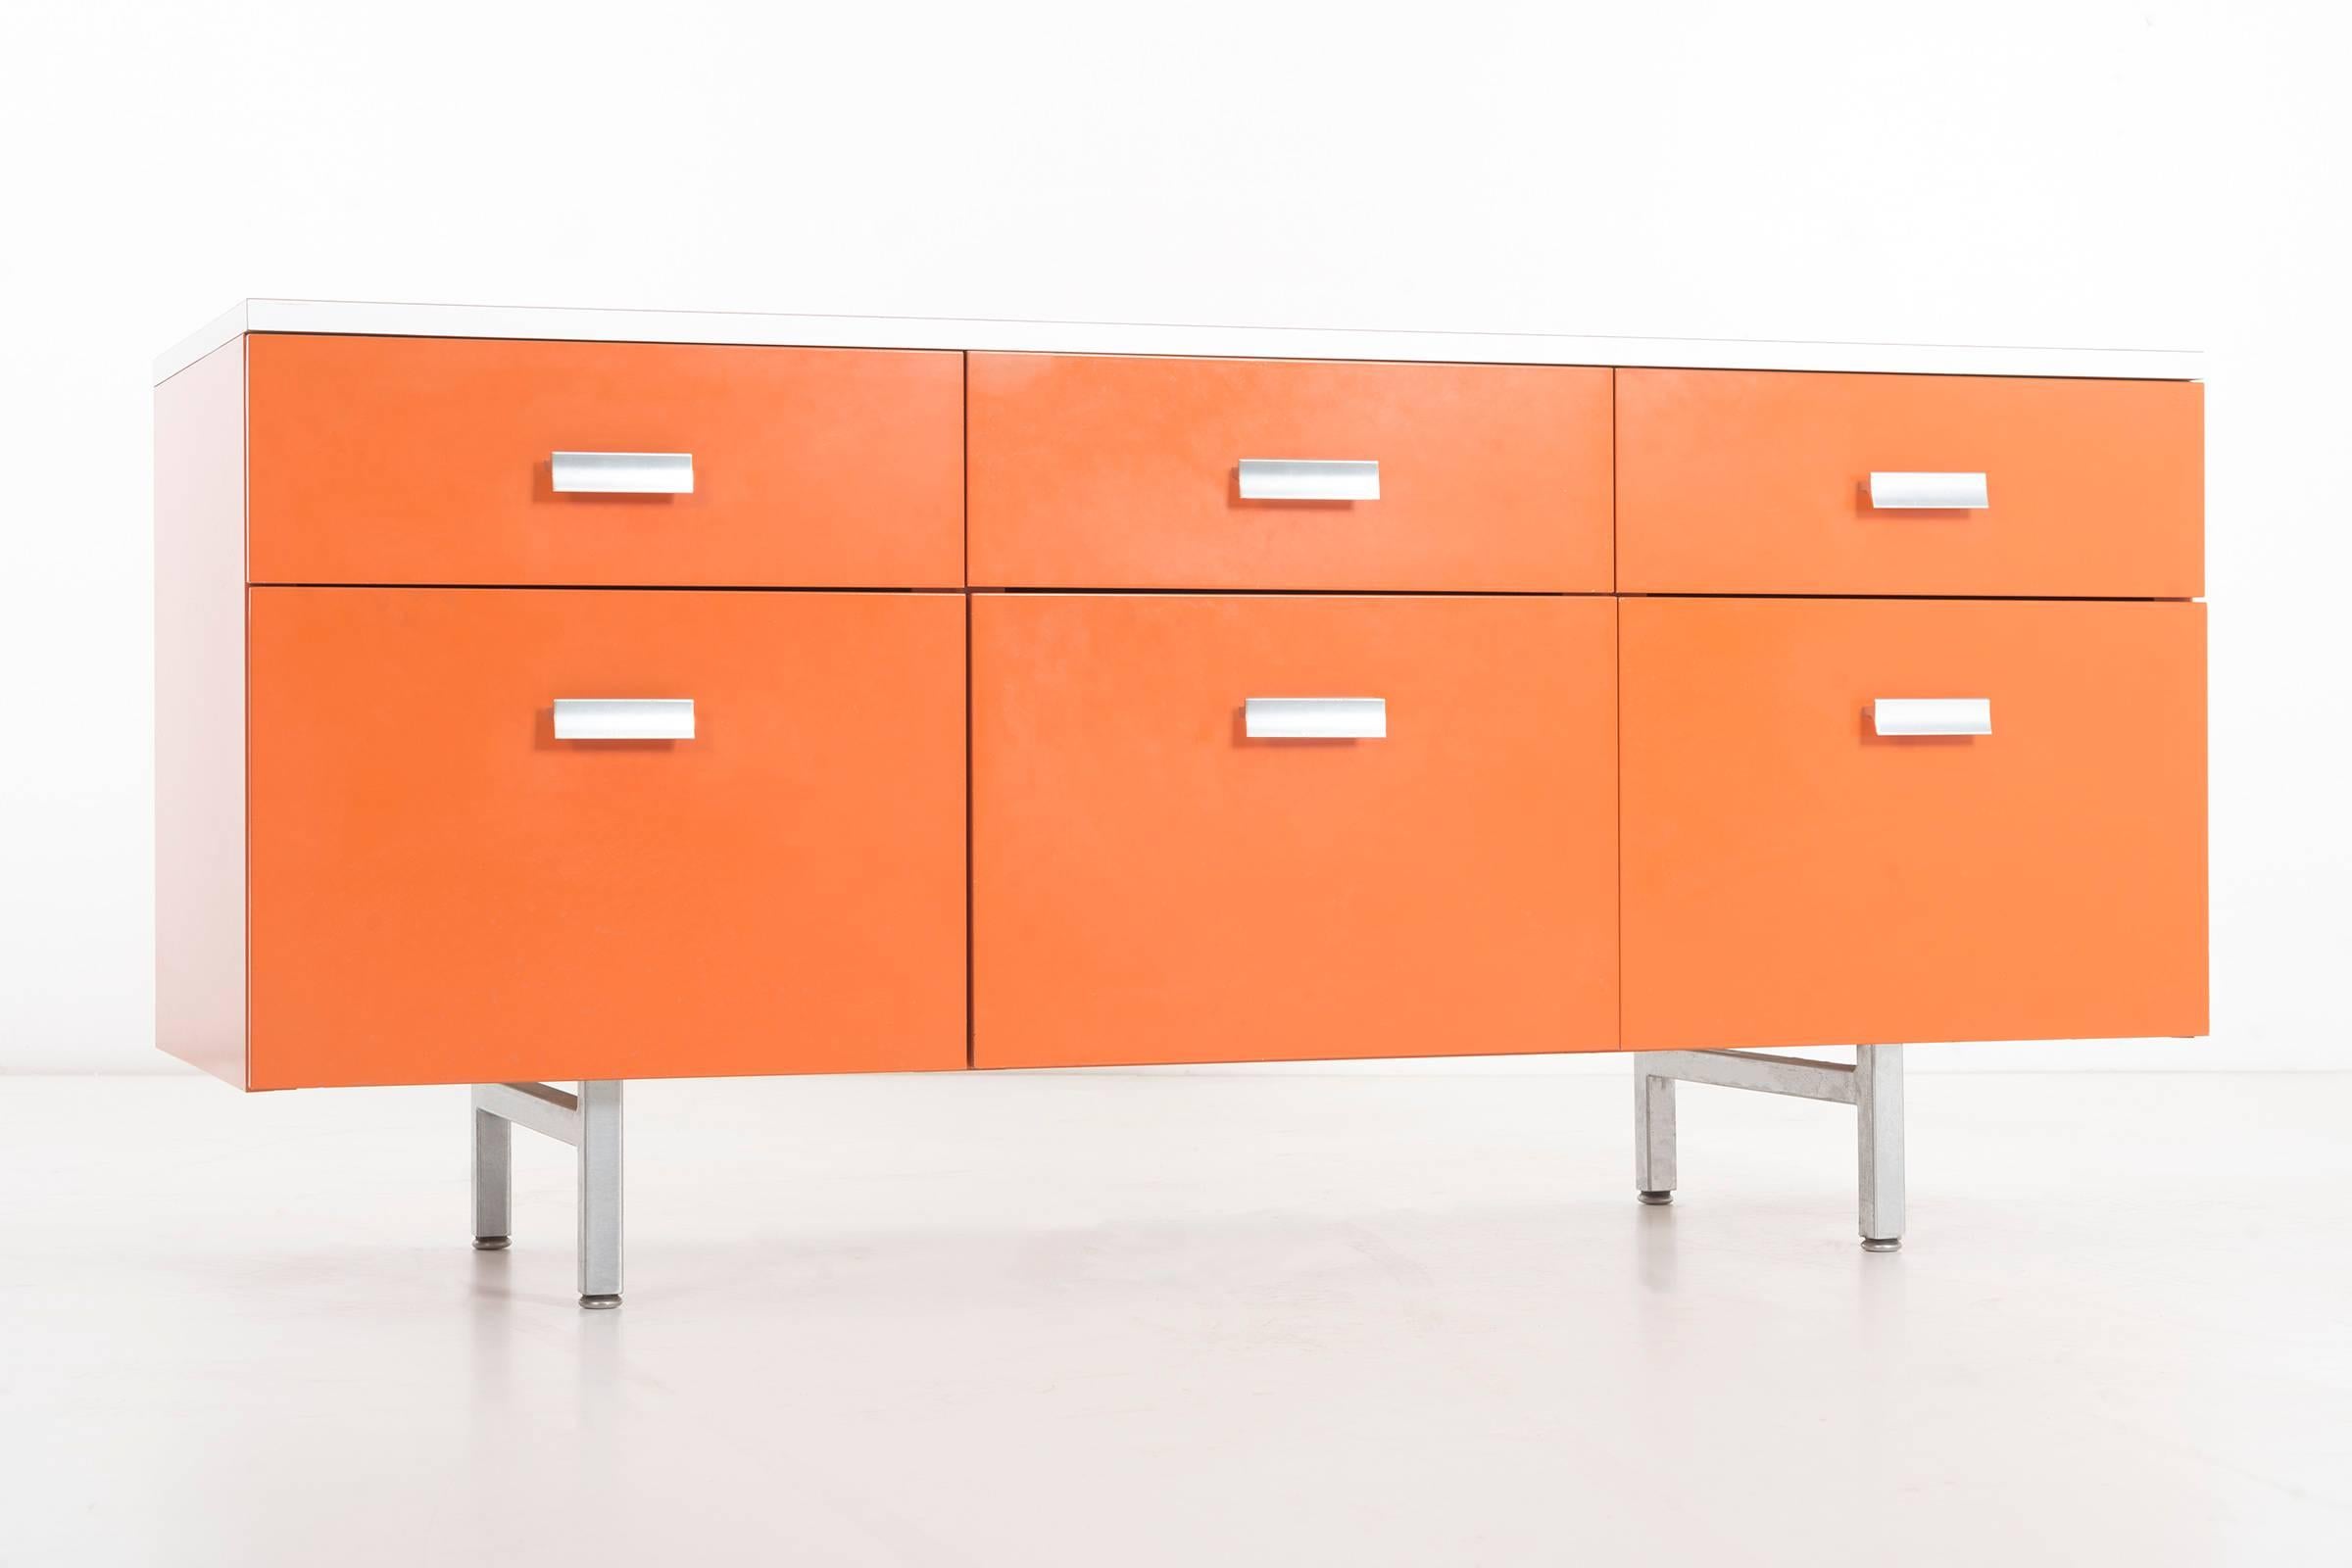 Nelson design for Herman Miller, Modern Management Group (M.M.G.), 6 drawer case in tangerine with white laminate top.
This series was designed to add a color palette to interiors rather then depending on wall and window treatments.
The production